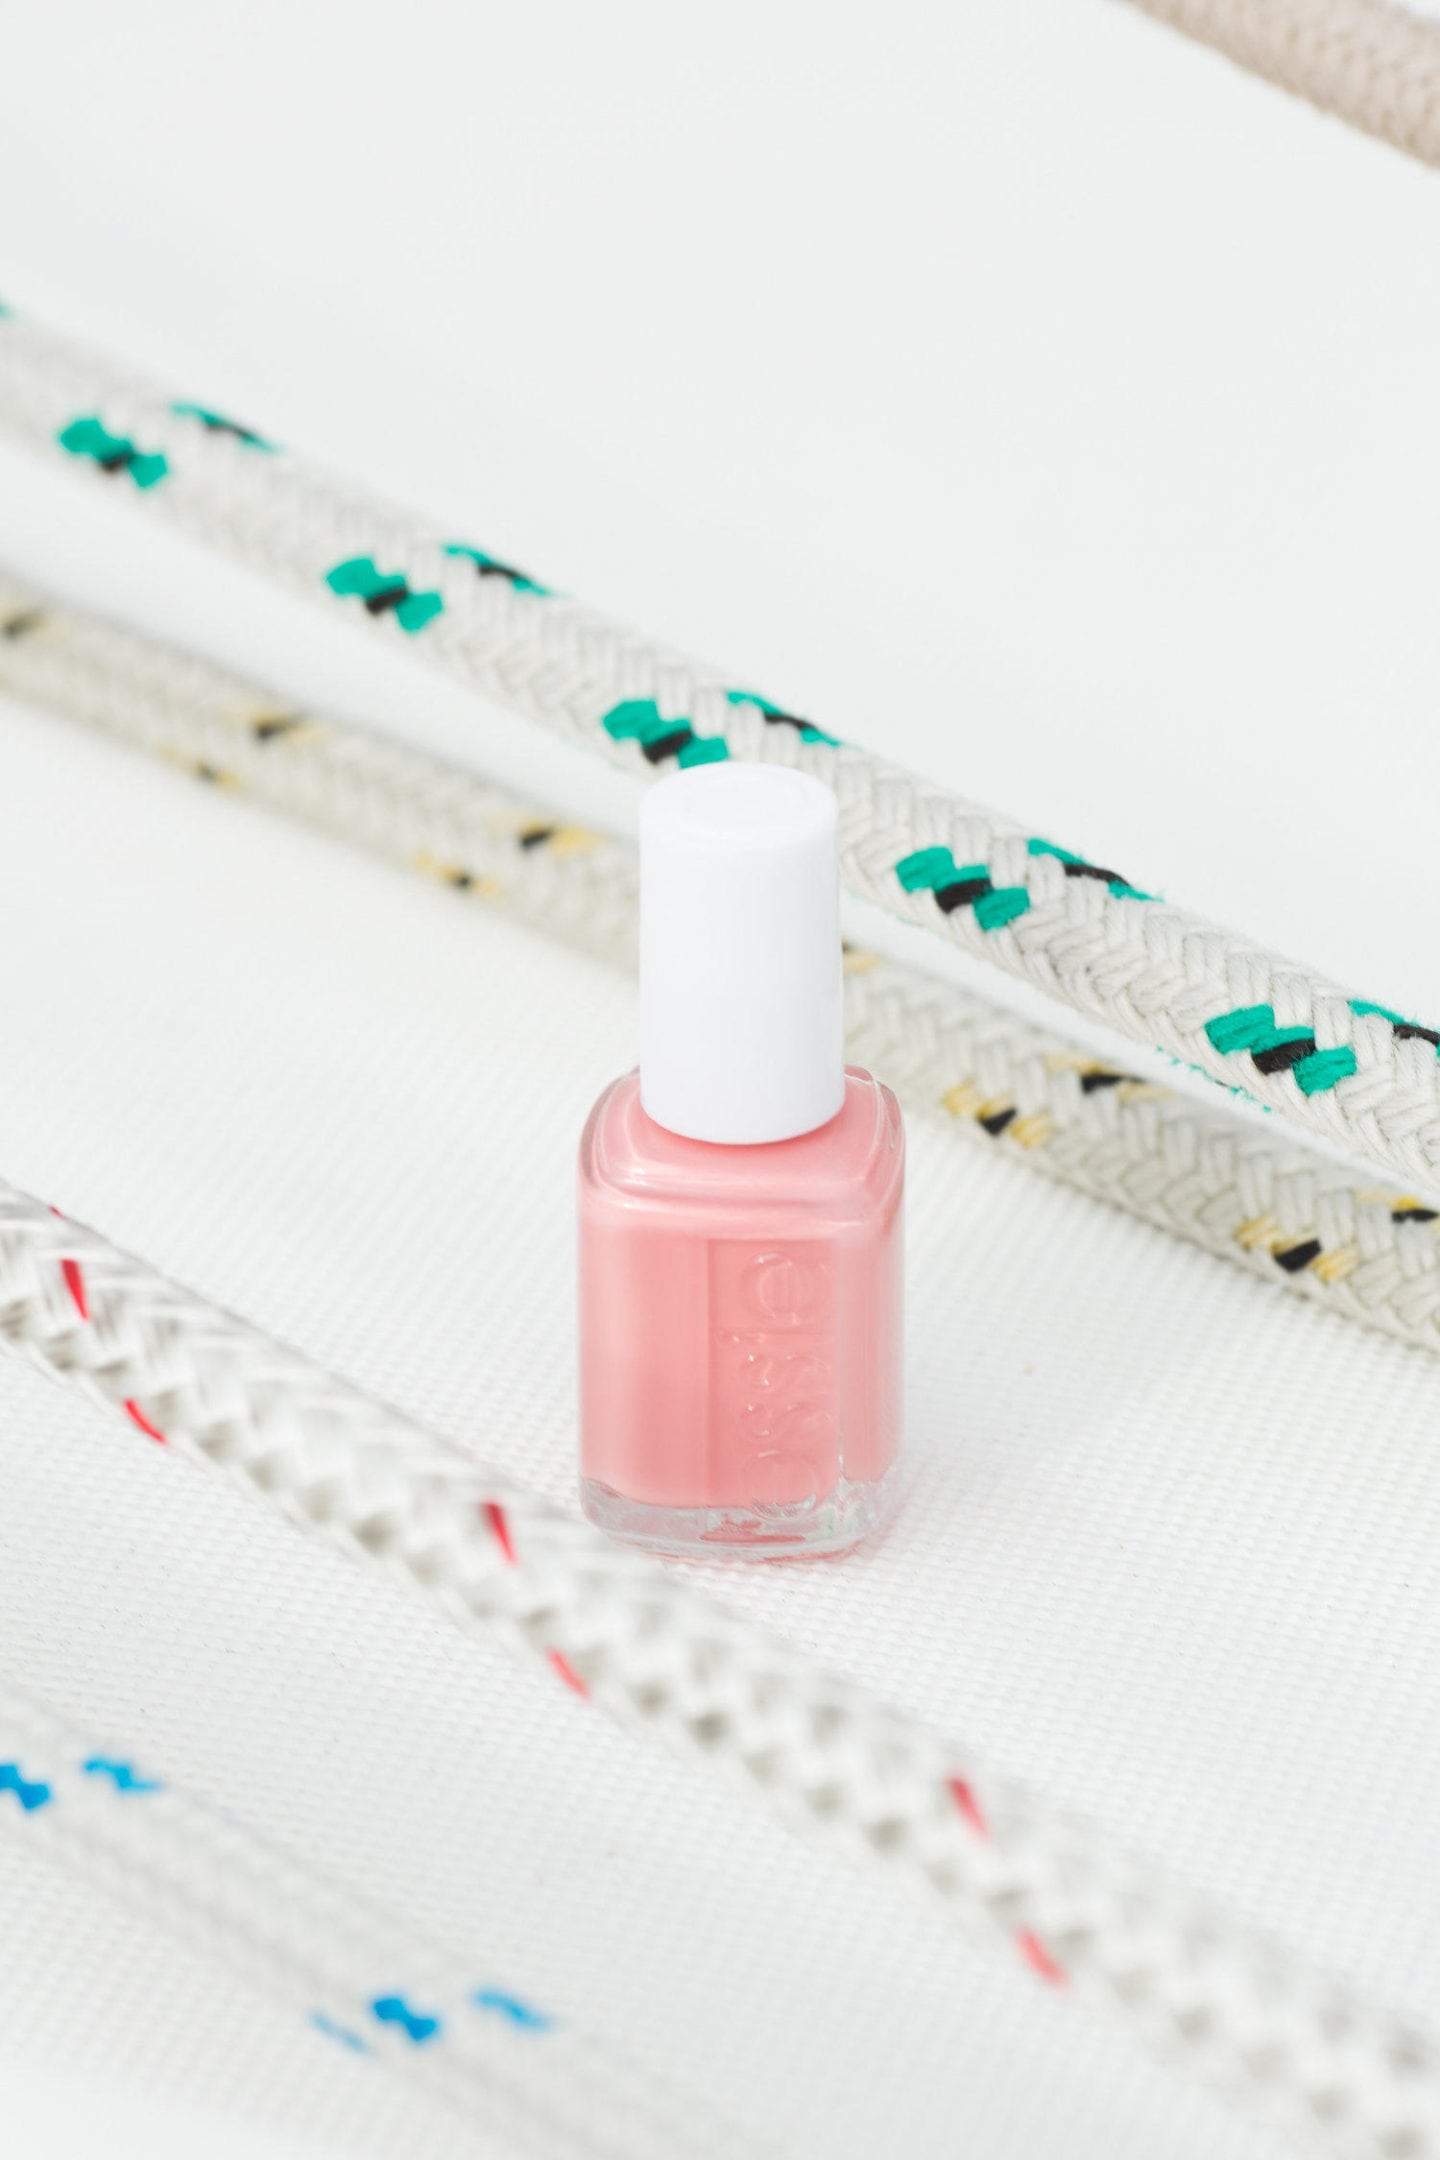 Essie Spring 2018 Nail Polish Collection - Perfect Mate